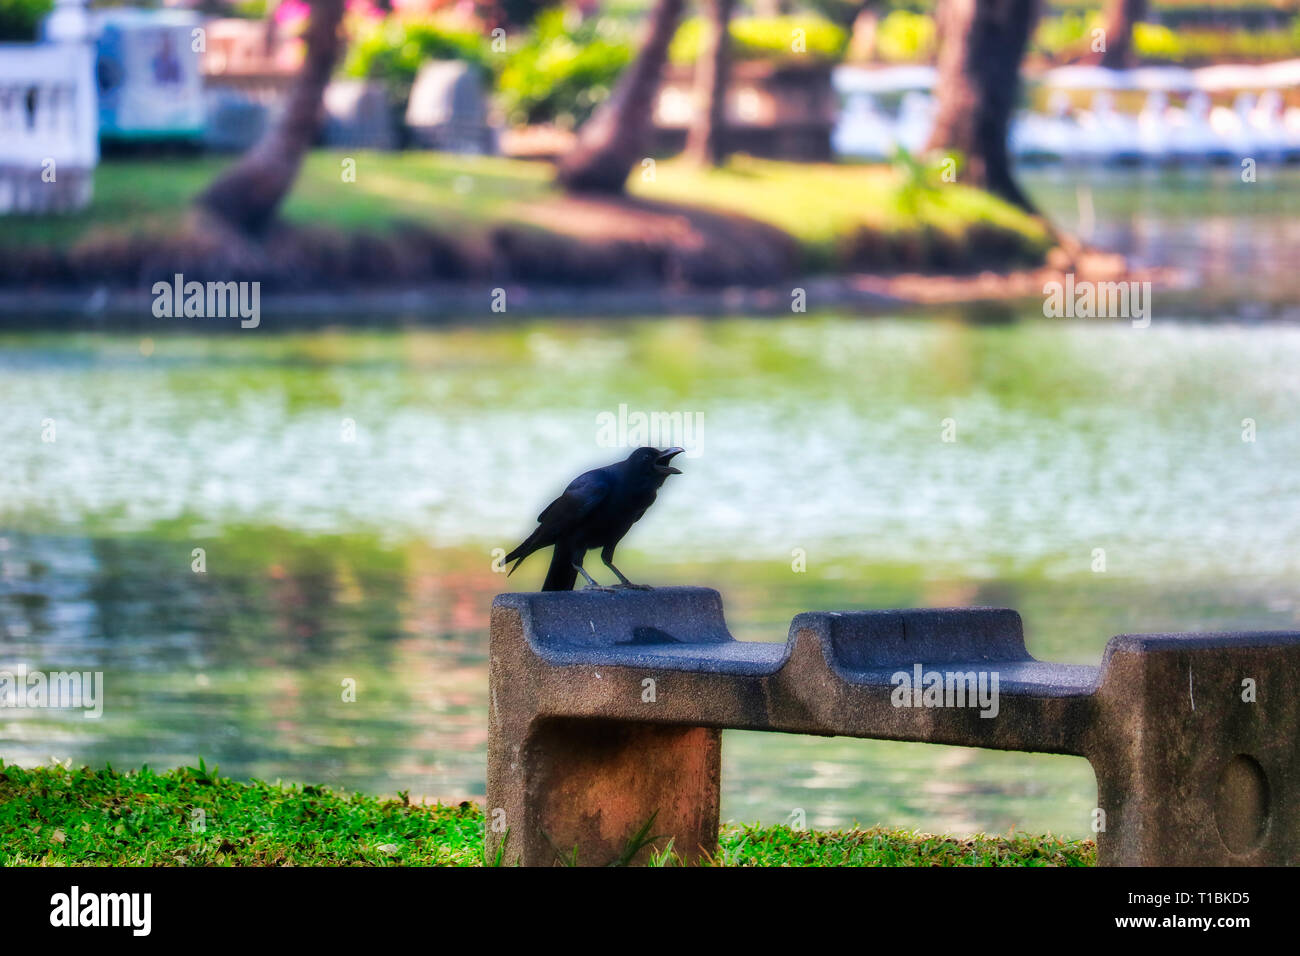 This unique picture shows a beautiful black raven. This great bird photo was taken in the lumpini park in Bangkok. Stock Photo